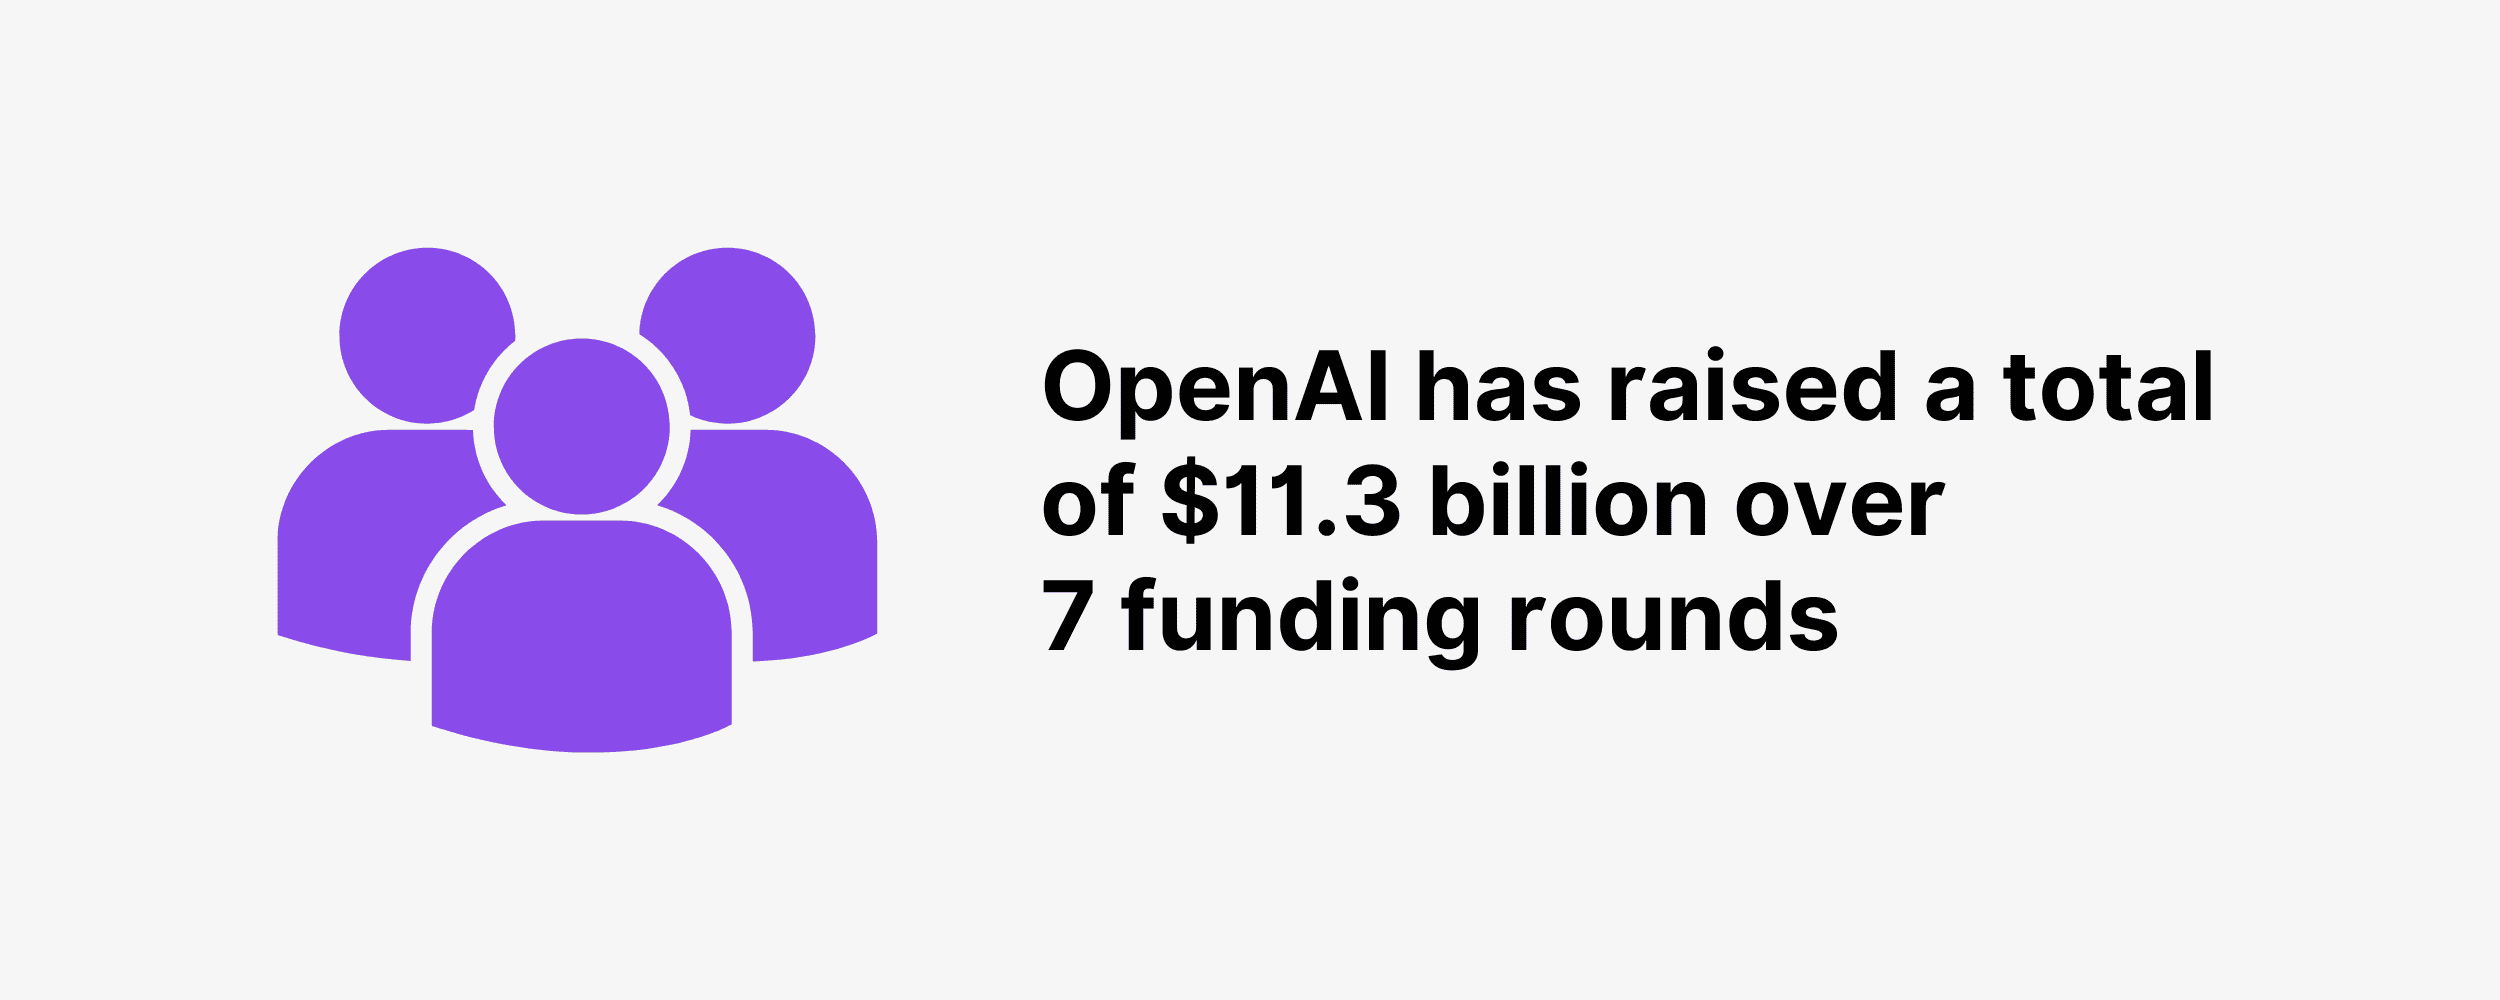 OpenAI has raised a total of $11.3 billion over 7 funding rounds